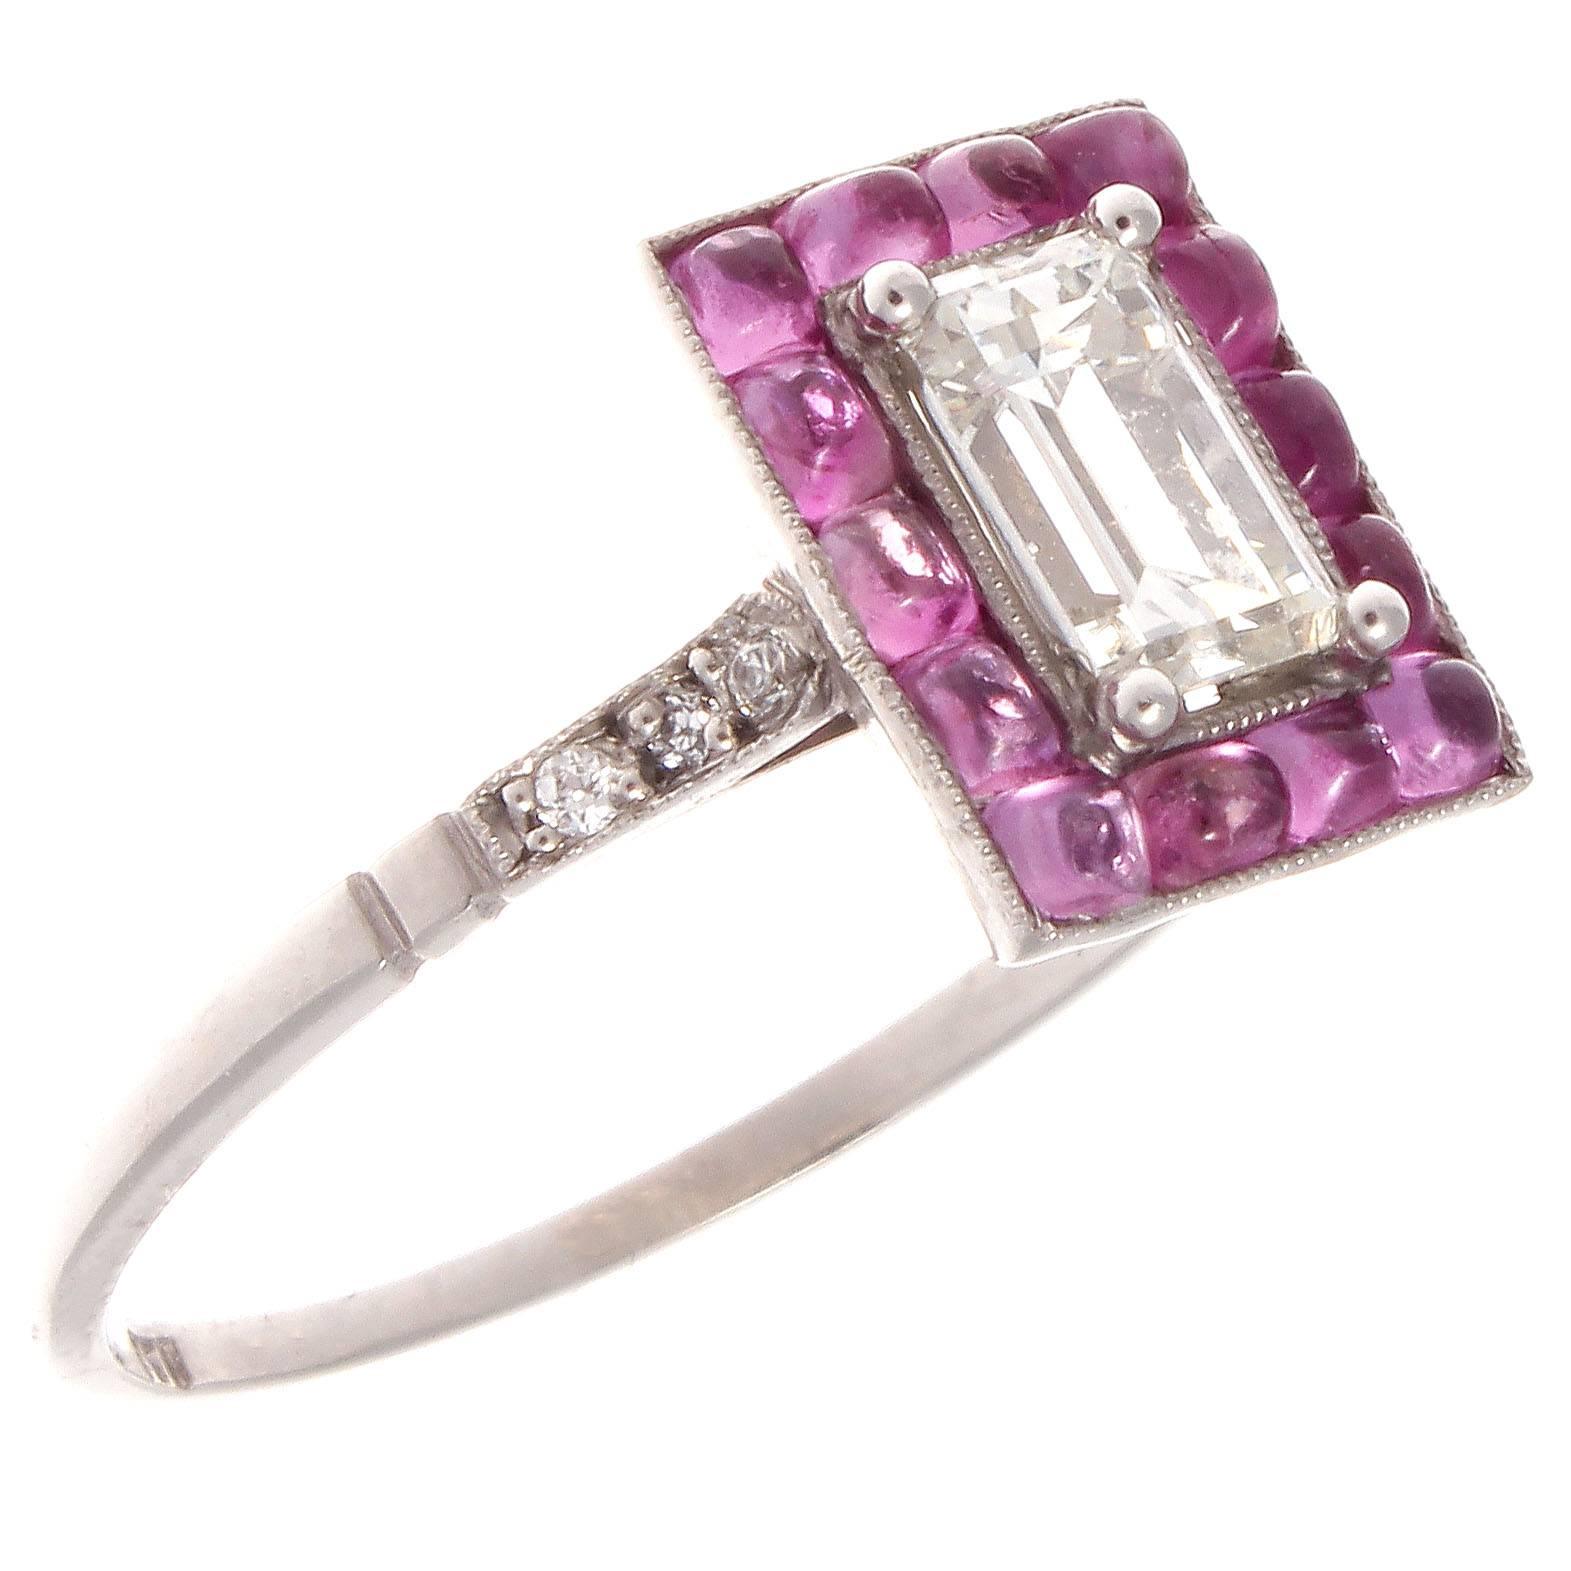 A modern rendition of the classic halo ring. Featuring a 0.71 carat emerald cut diamond that is surrounded by a halo of cabochon cut pink sapphires. Crafted in platinum.

Ring size 7 and may be resized. 